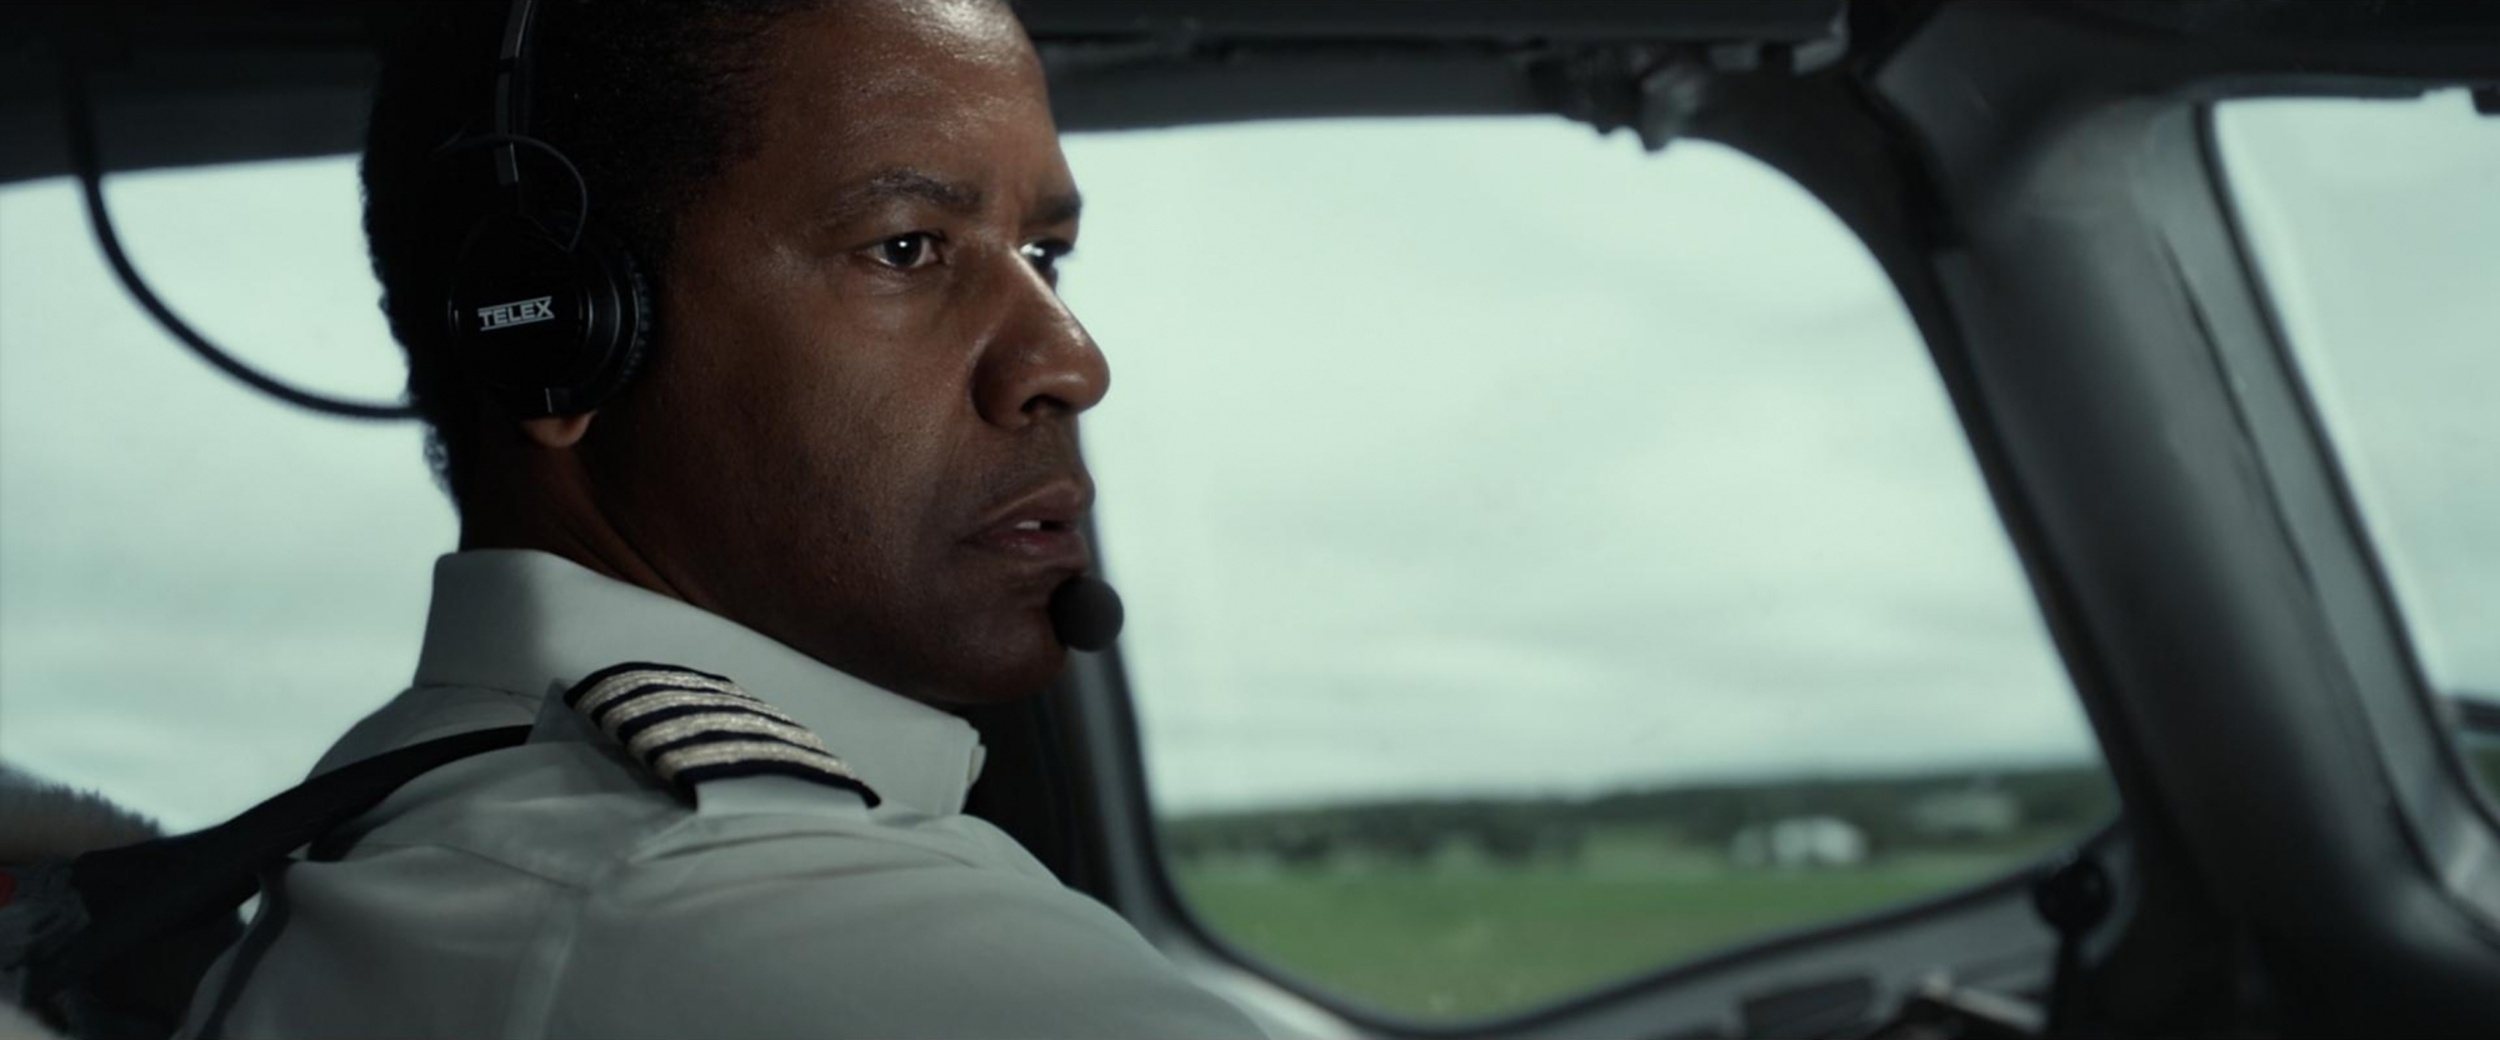 <p>Denzel Washington rolls a commercial airliner. It’s wild. This is the first film on this list where a plane is crucial to the plot, but it is not set almost entirely on a plane. There is a lot of this Robert Zemeckis film where Washington is on the ground, using drugs, getting drunk, and dealing with the inquiry into what happened when, again, the dude rolled a commercial plane.</p><p><a href='https://www.msn.com/en-us/community/channel/vid-cj9pqbr0vn9in2b6ddcd8sfgpfq6x6utp44fssrv6mc2gtybw0us'>Follow us on MSN to see more of our exclusive entertainment content.</a></p>